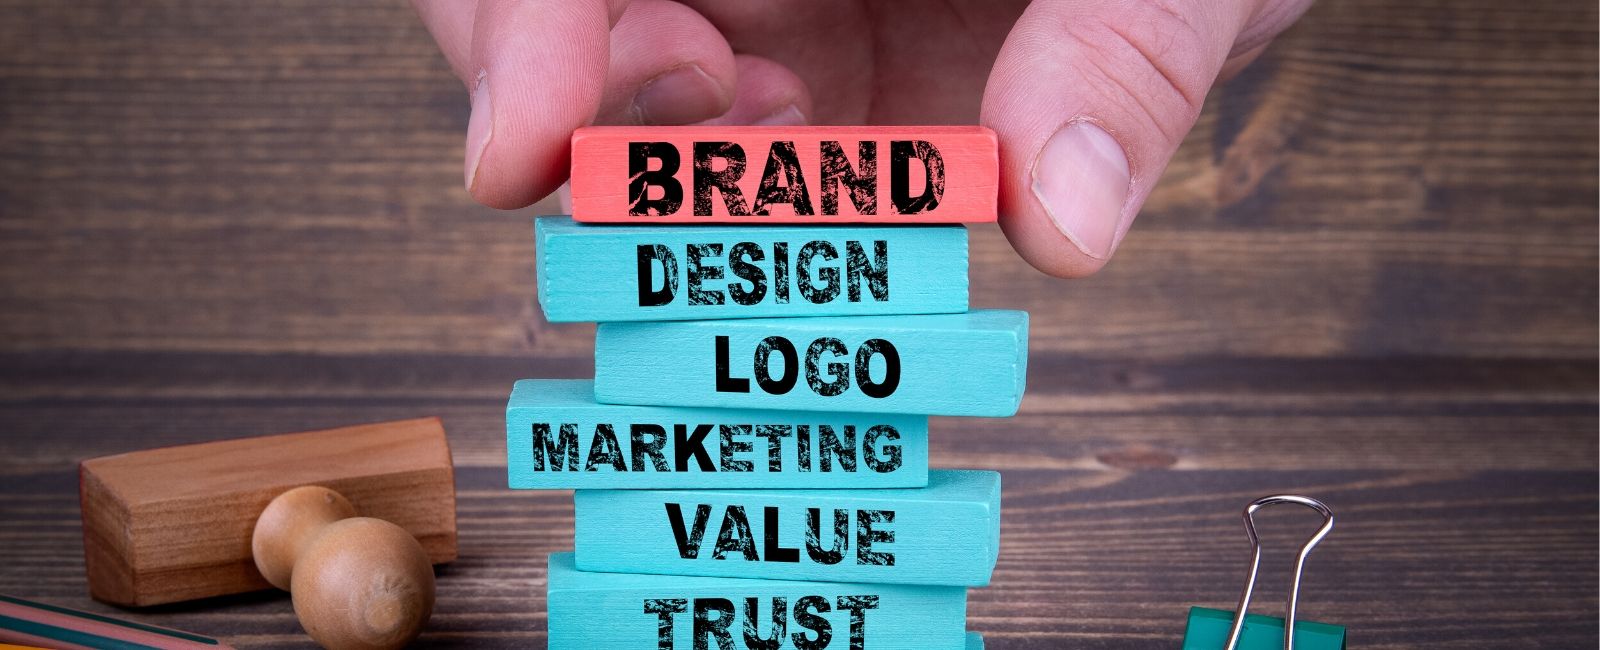 Image-showing-some-elements-of-branding